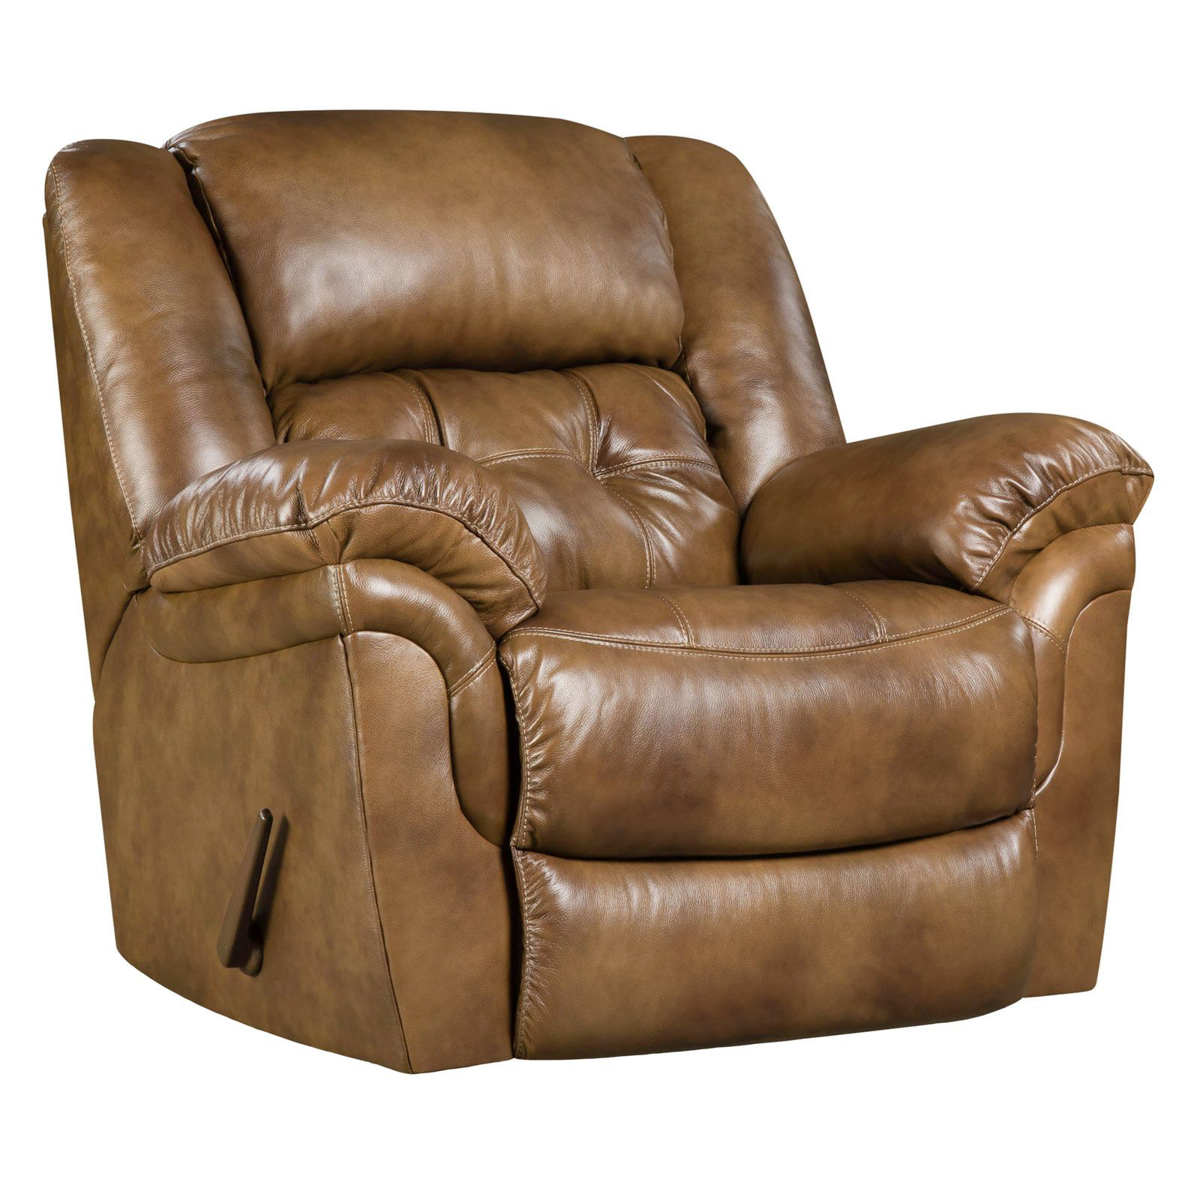 Picture of Cheyenne Leather Rocker Recliner